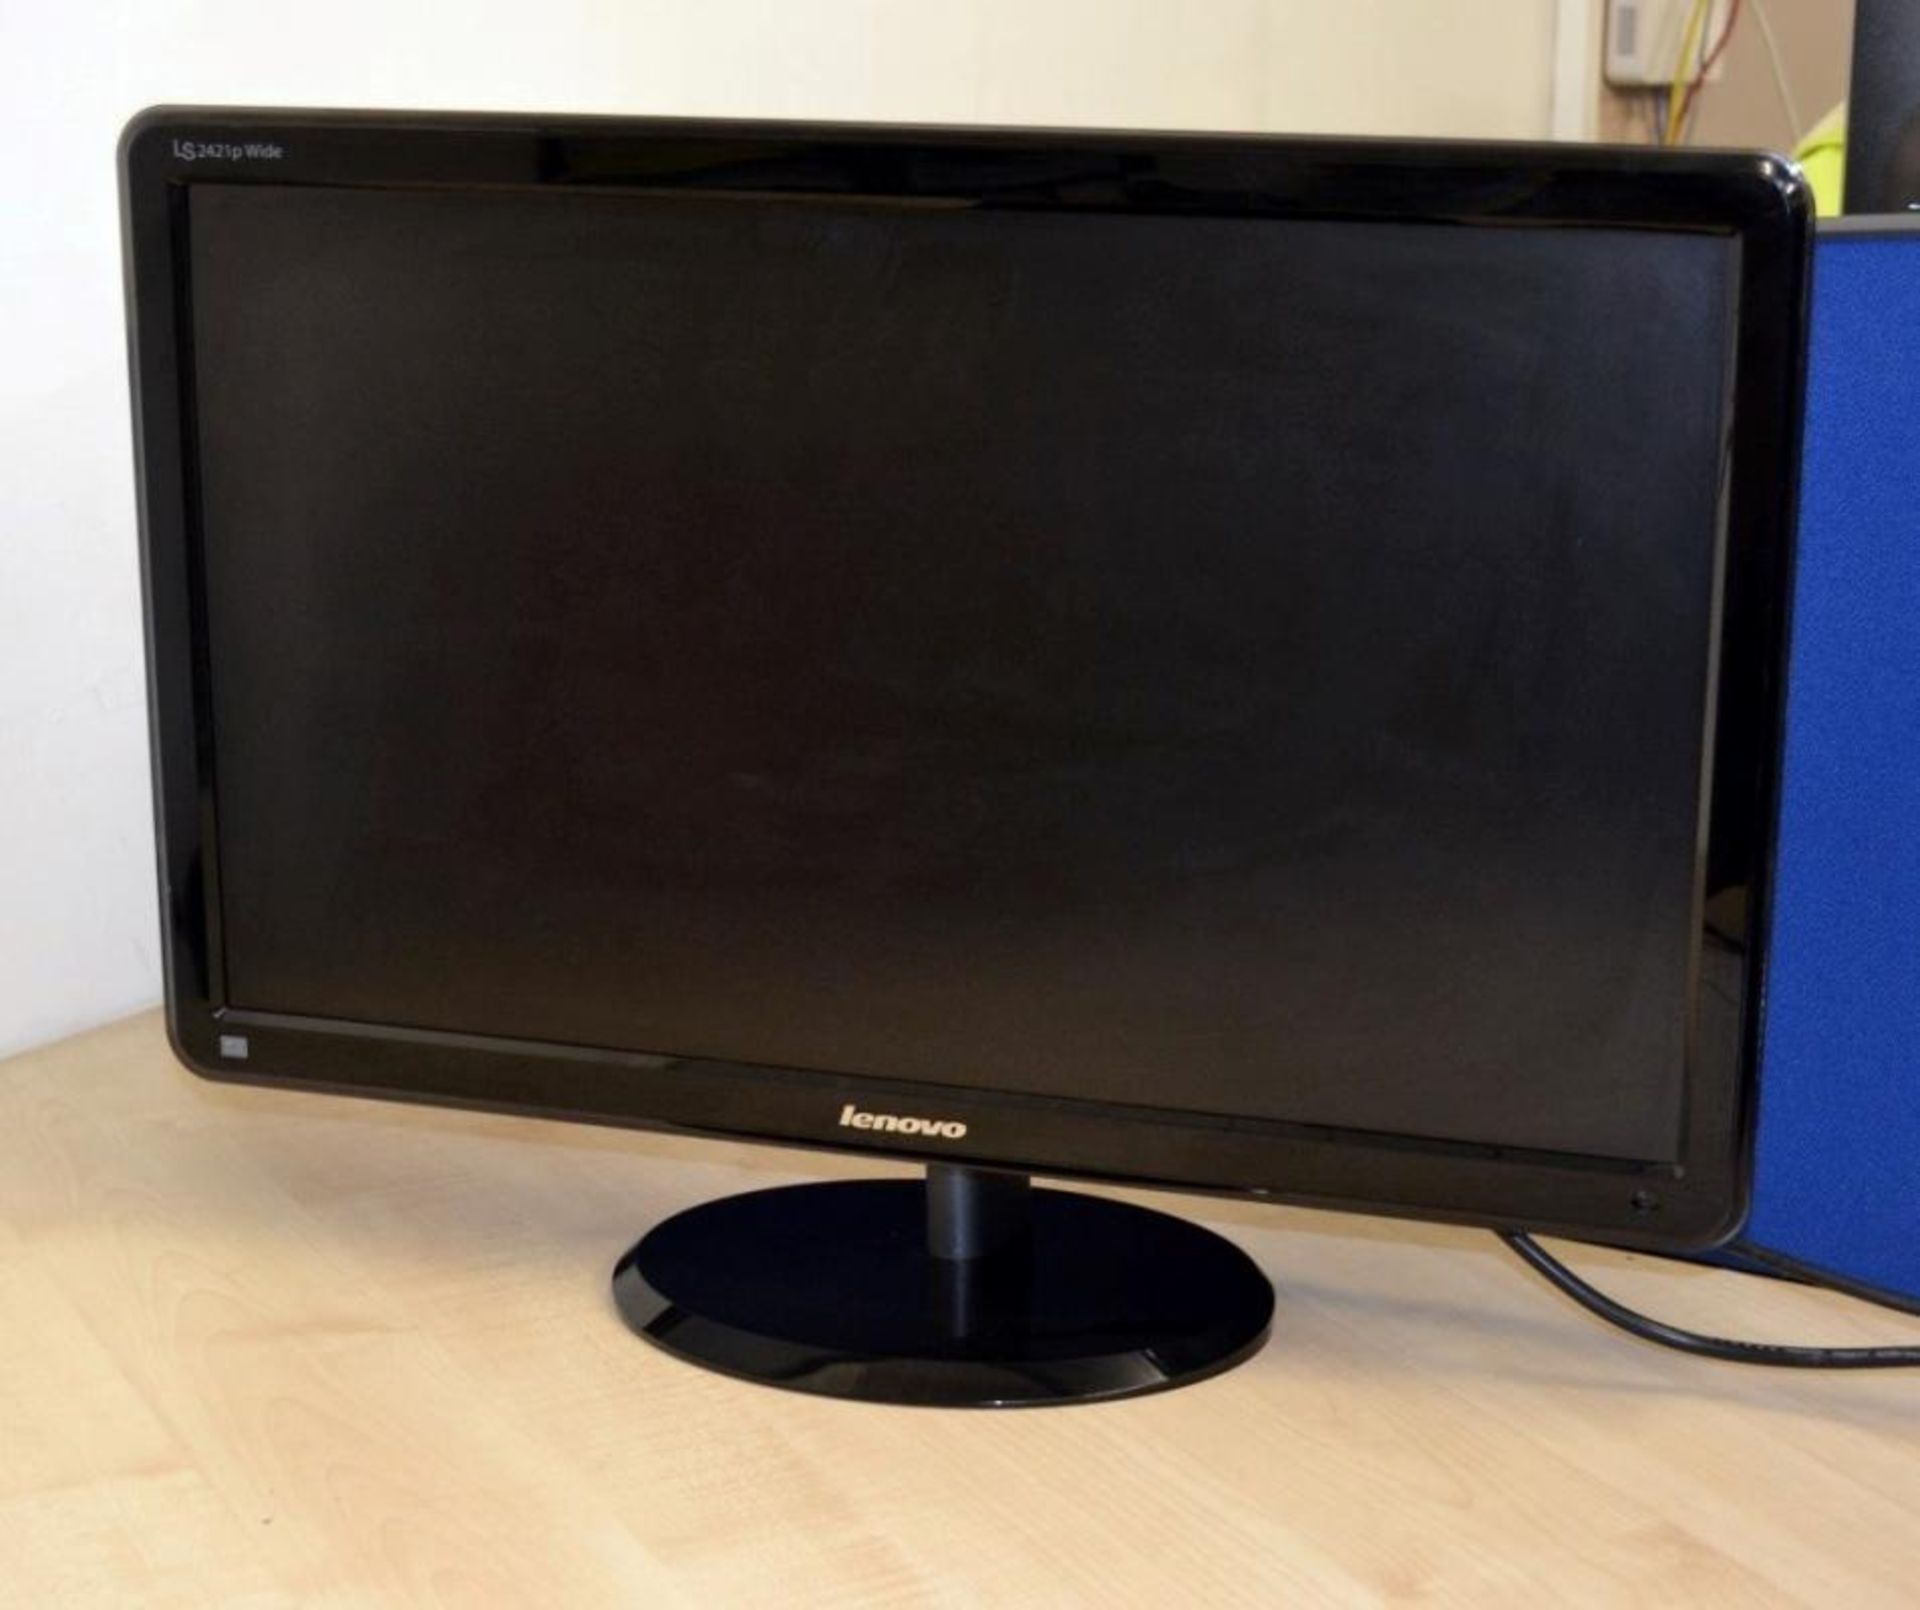 1 x Lenovo LS2421p Wide 23.6" Full HD LED TFT Monitor (Model: 4015-LS1) - Recently Taken From A - Image 10 of 14